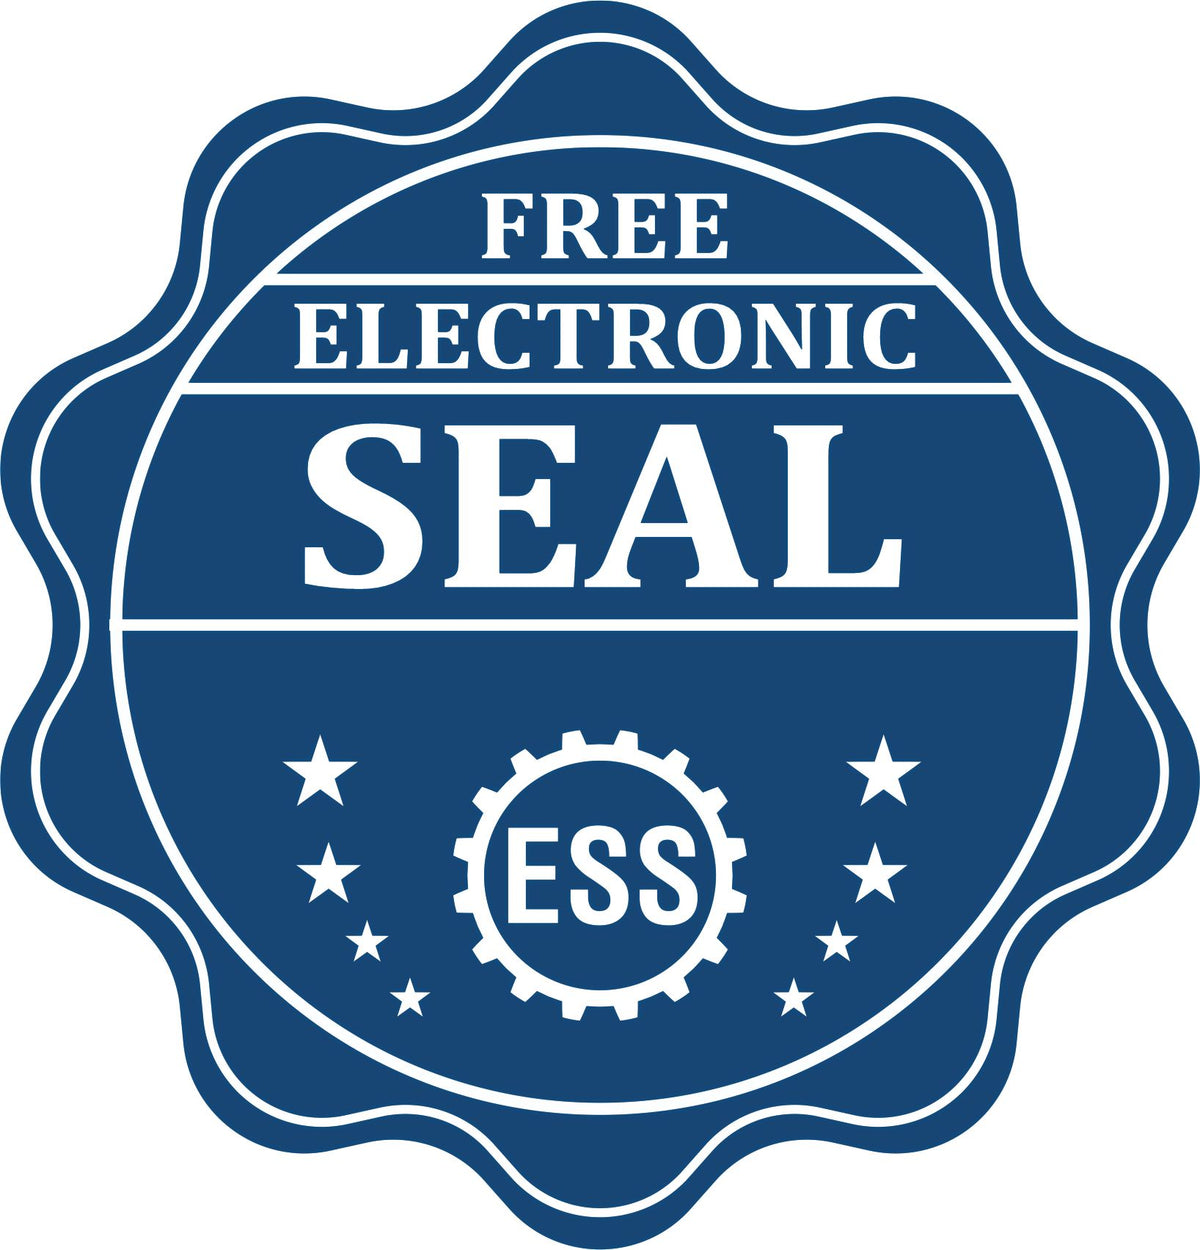 A badge showing a free electronic seal for the Long Reach West Virginia PE Seal with stars and the ESS gear on the emblem.